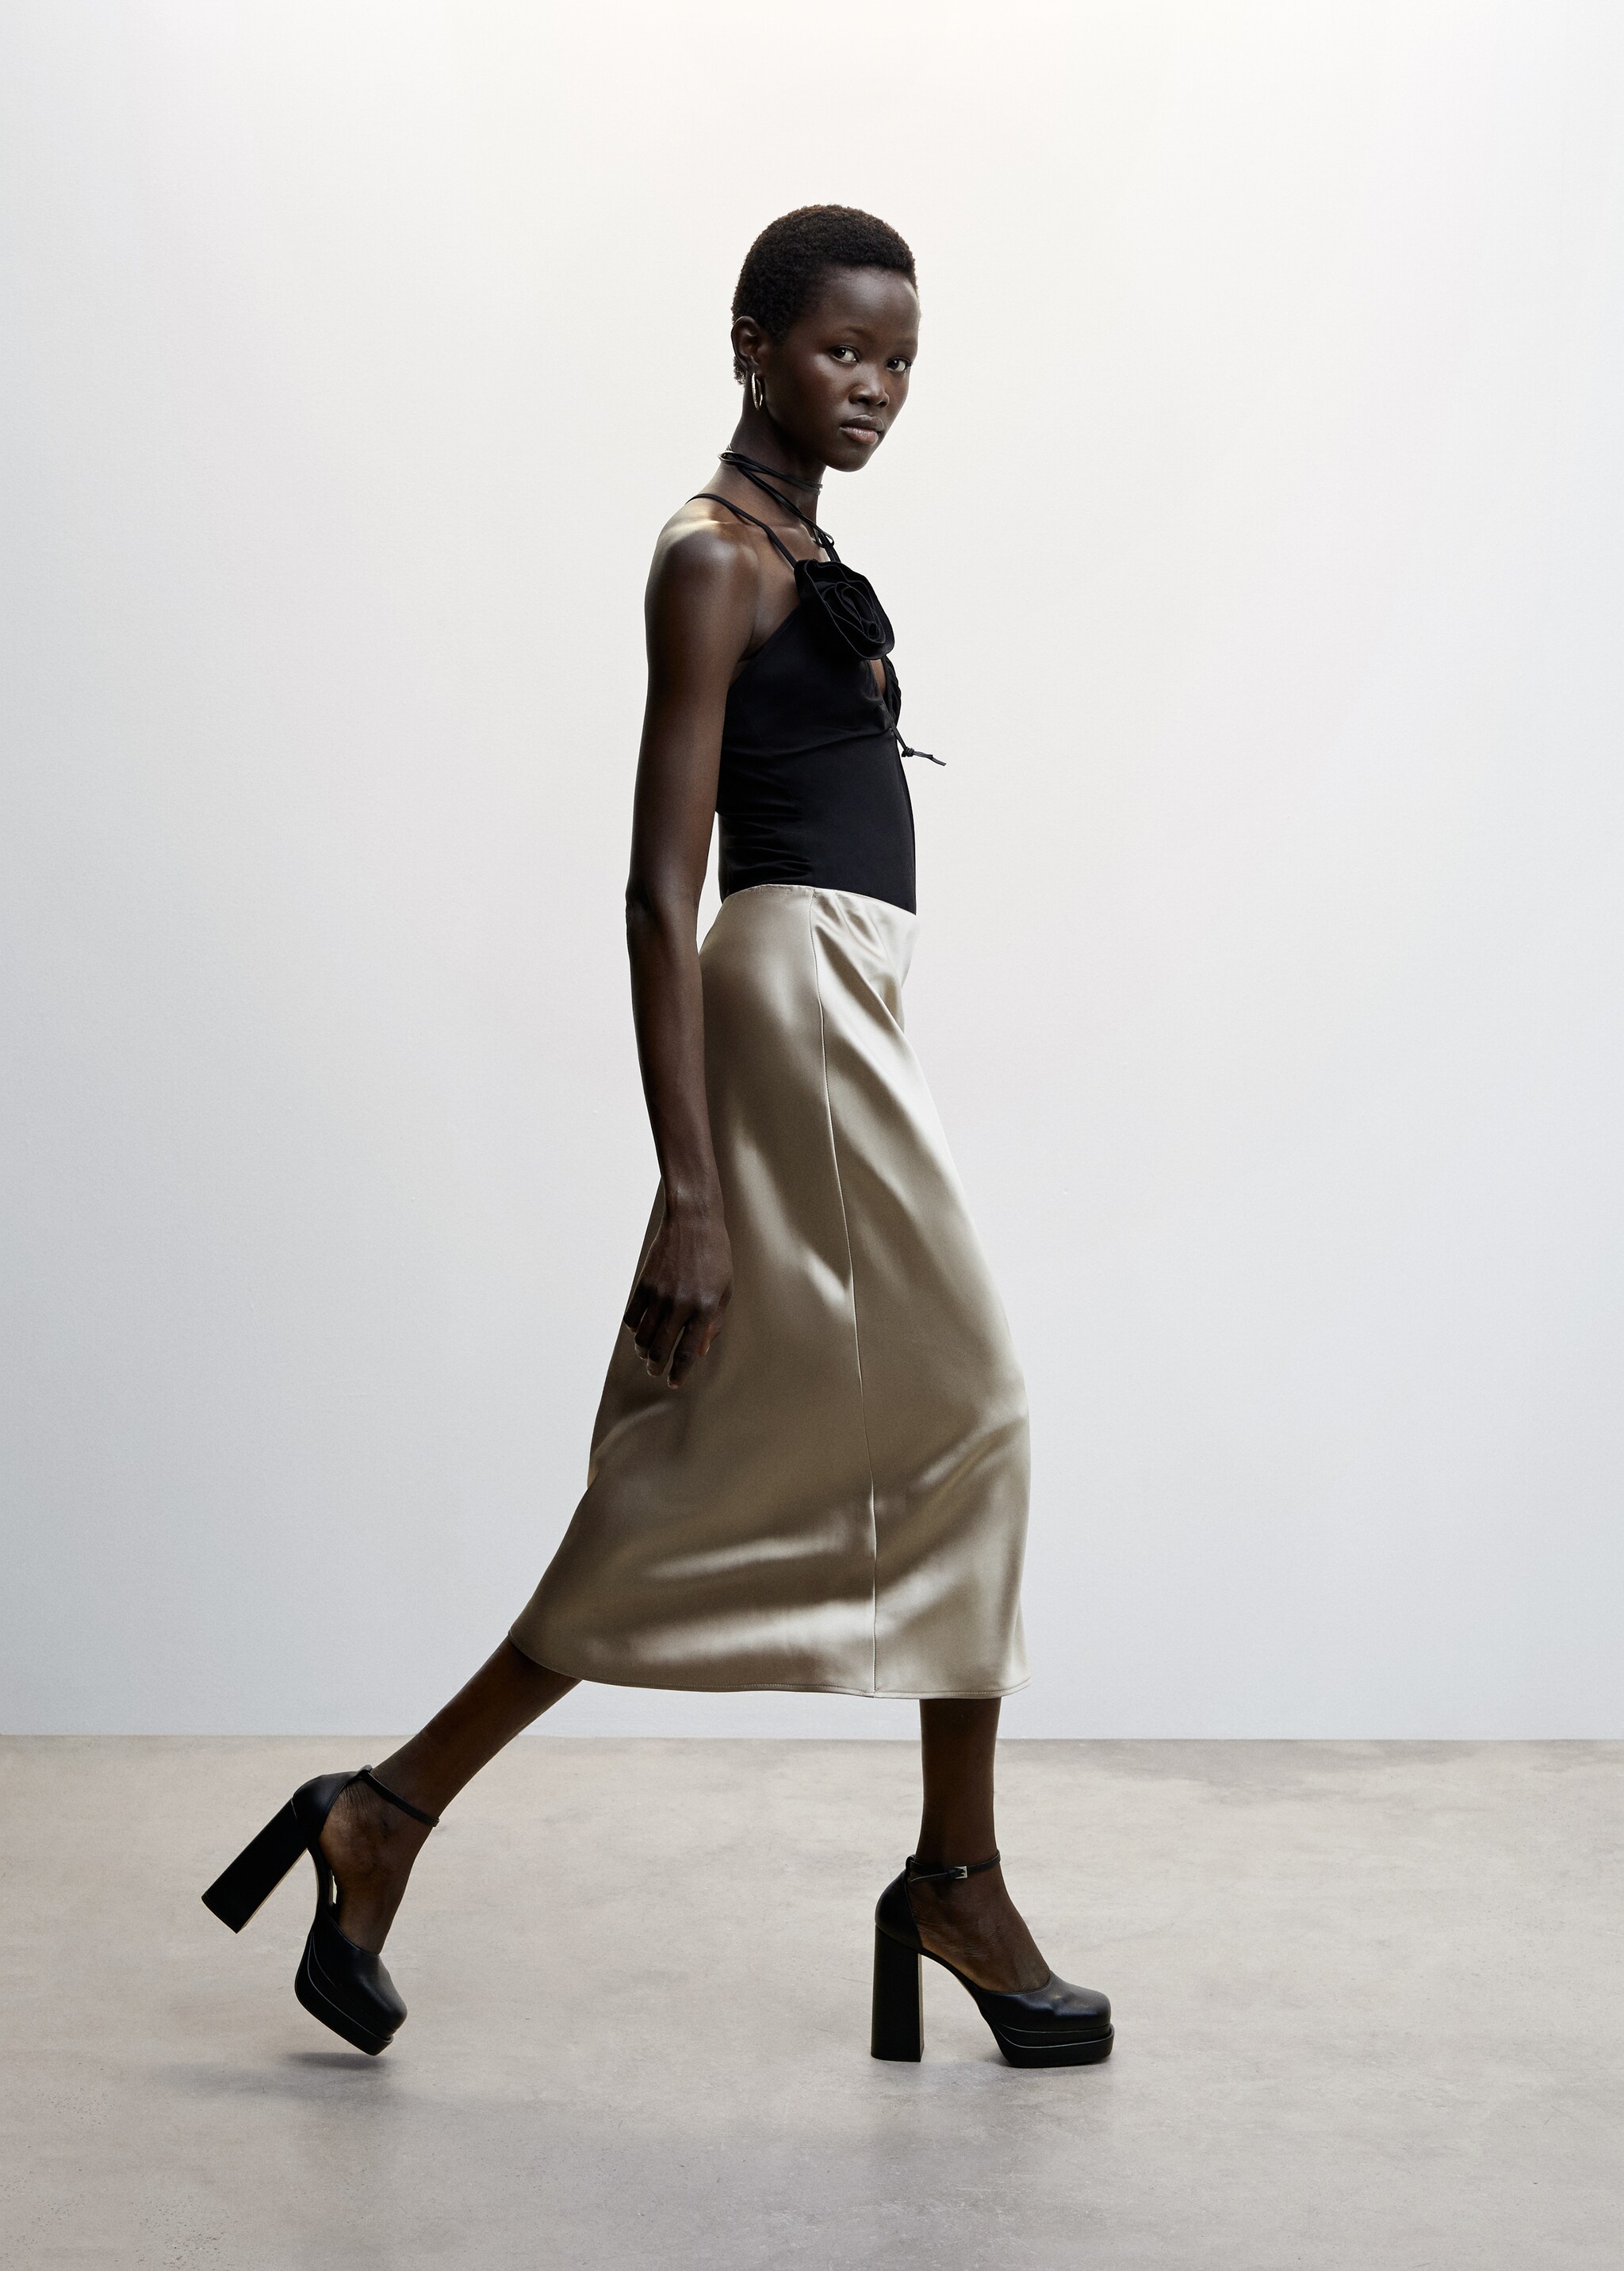 Midi satin skirt - Details of the article 1